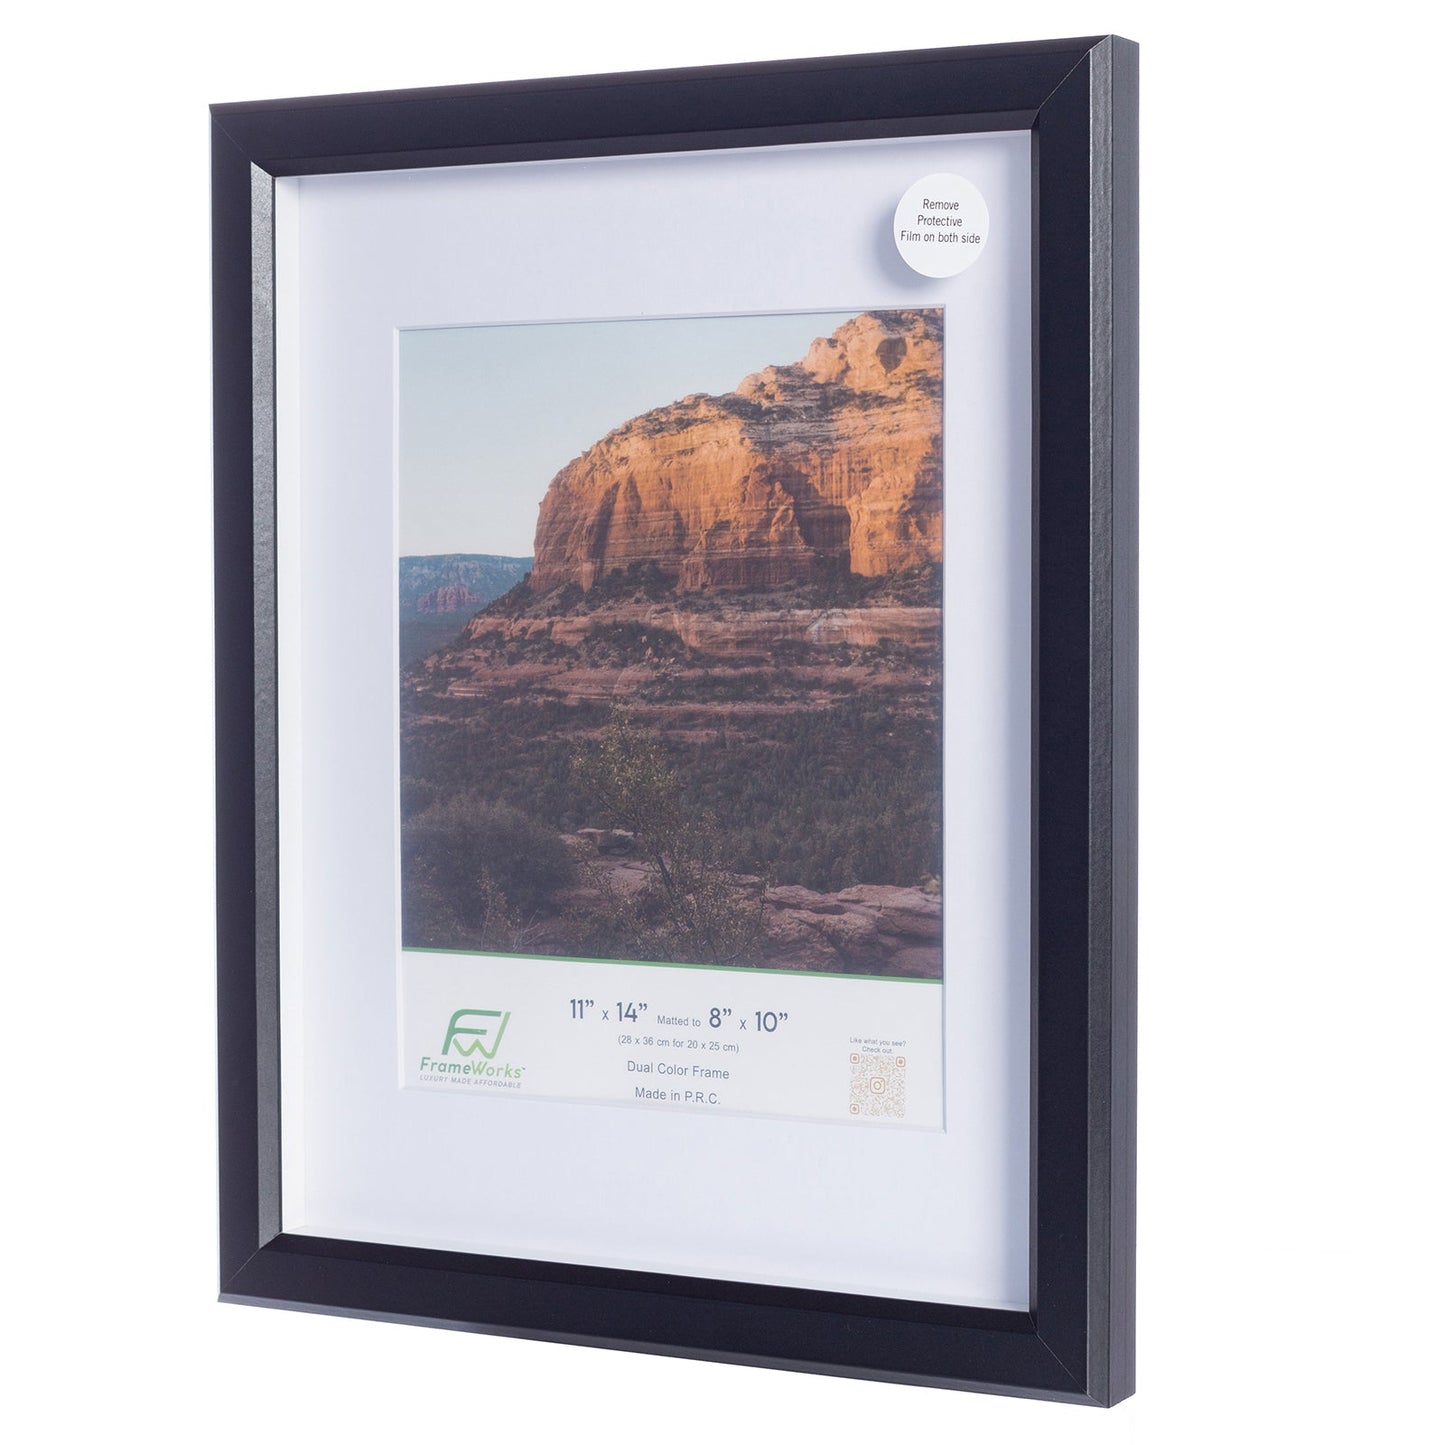 11" x 14" Black MDF Wood Multi-Pack Gunnabo Picture Frames, 8" x 10" Matted